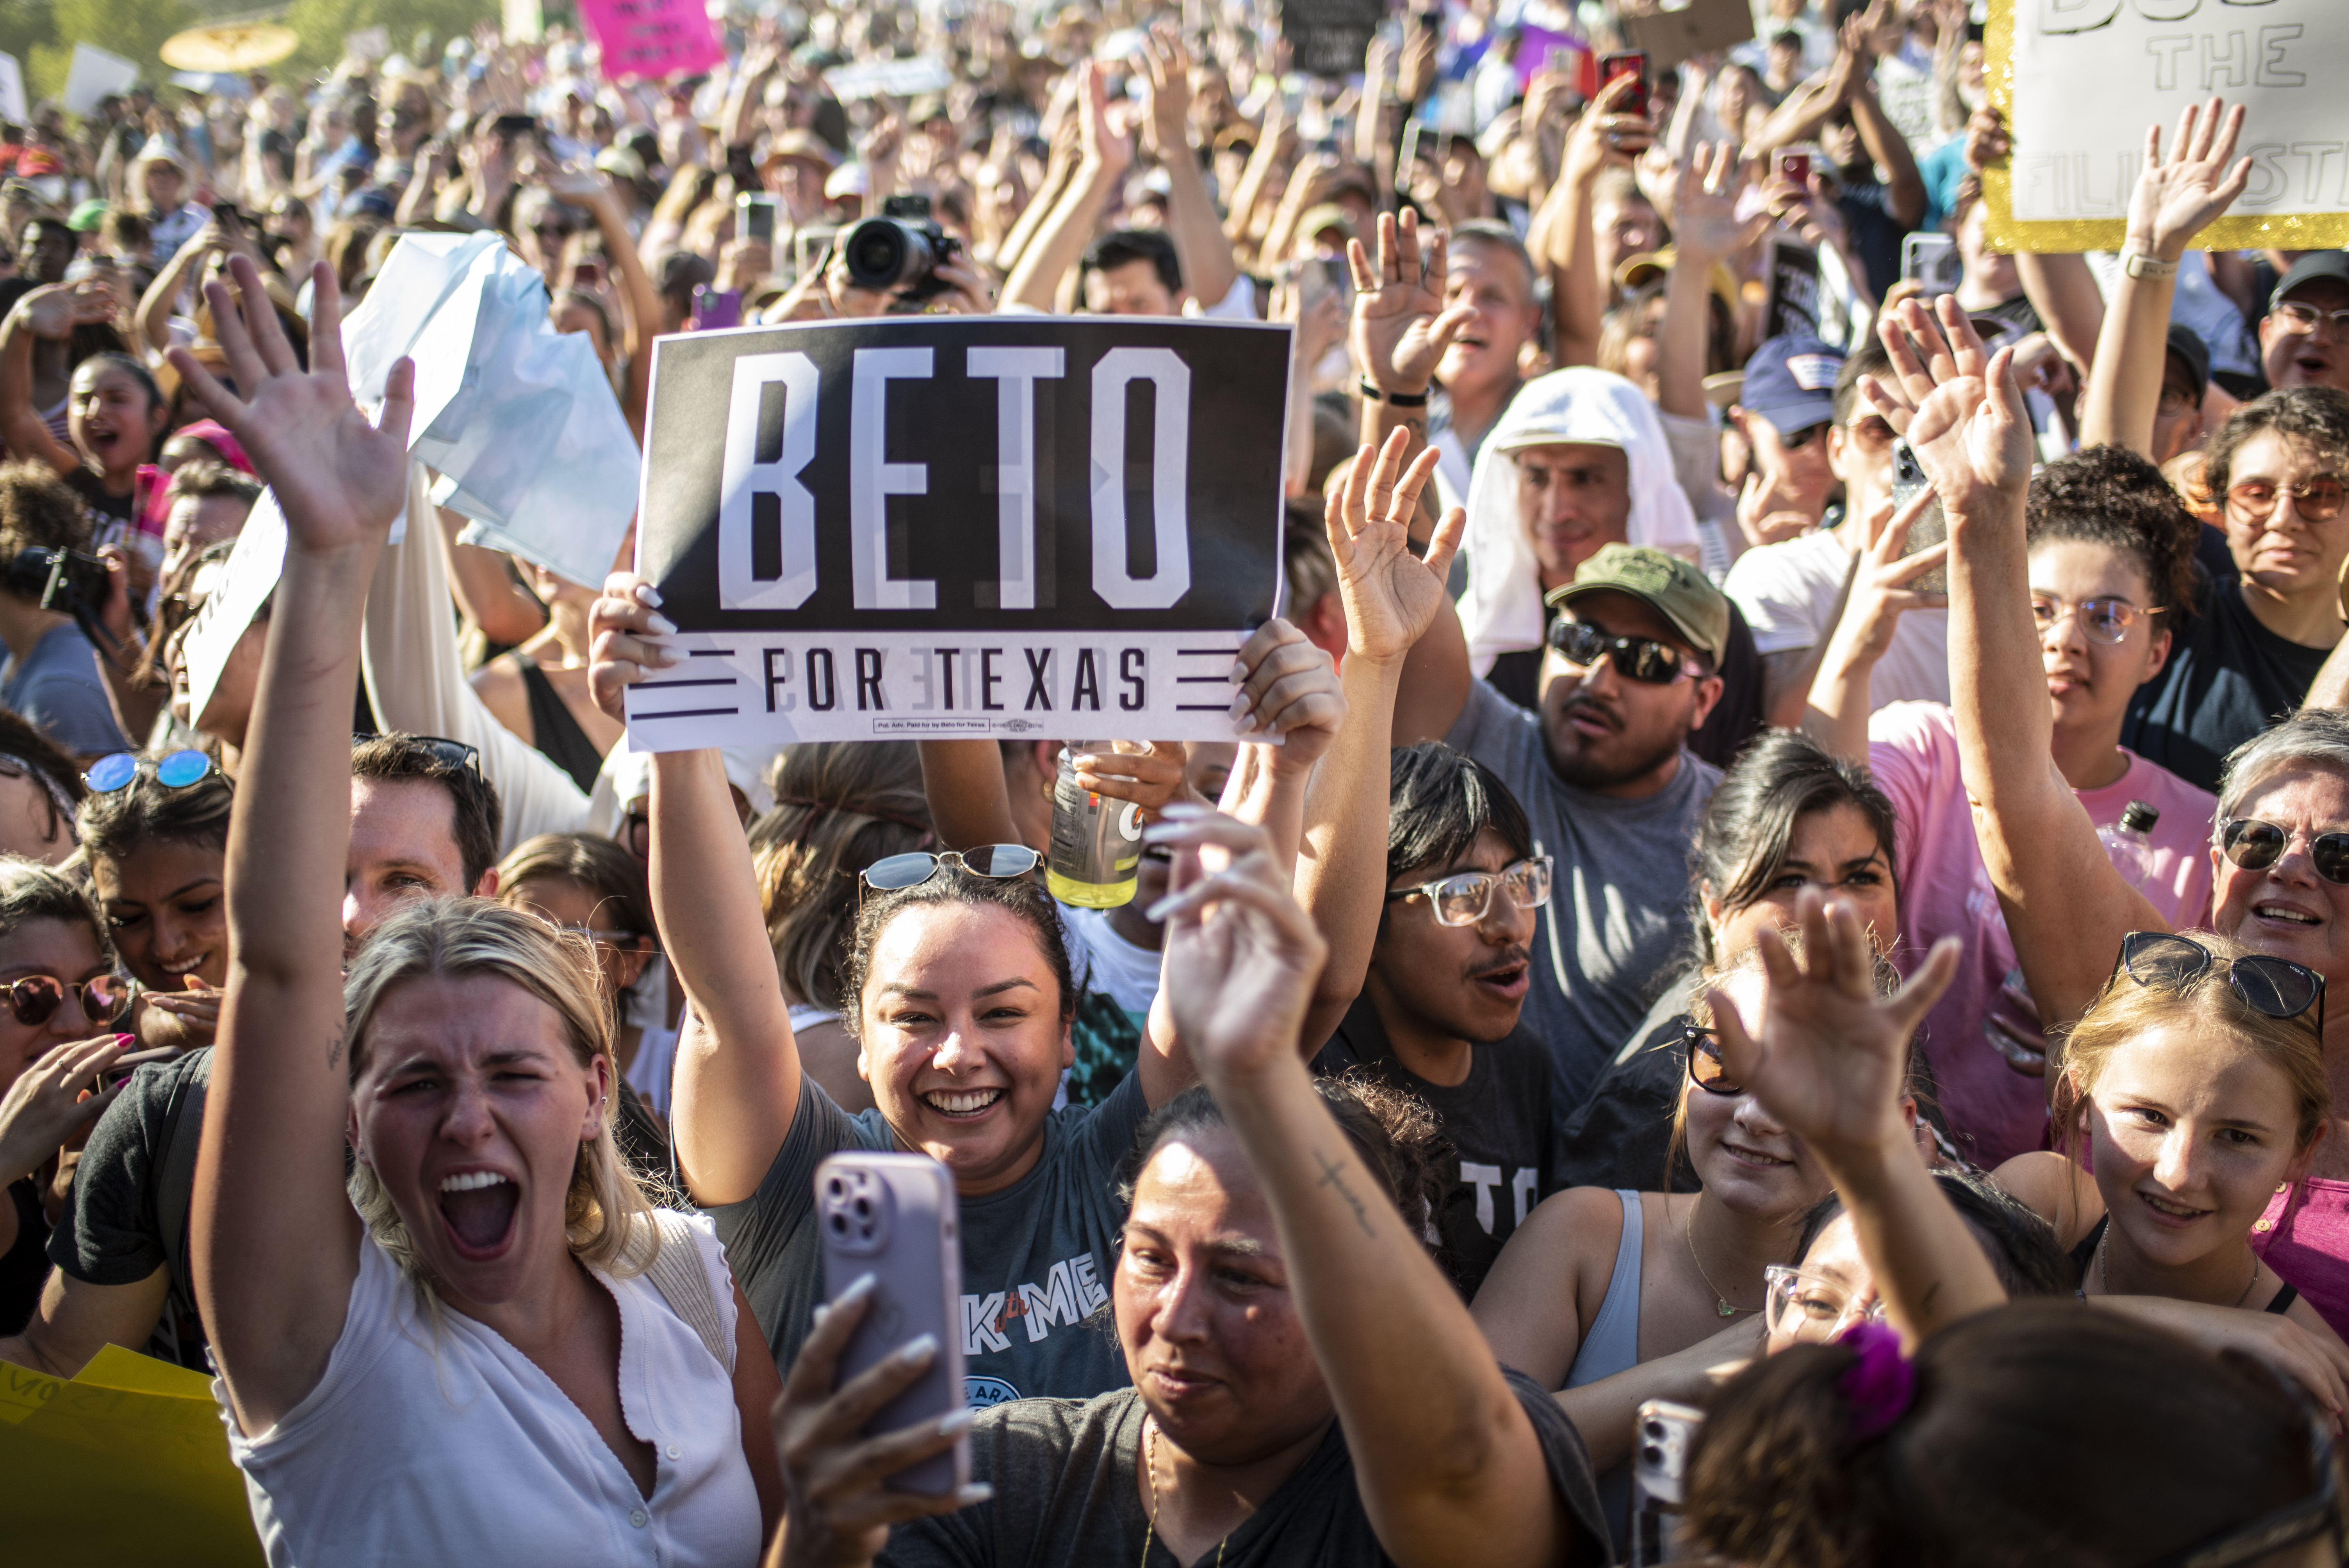 A crowd of supporters hold up signs for Texas gubernatorial candidate Beto O’Rourke.